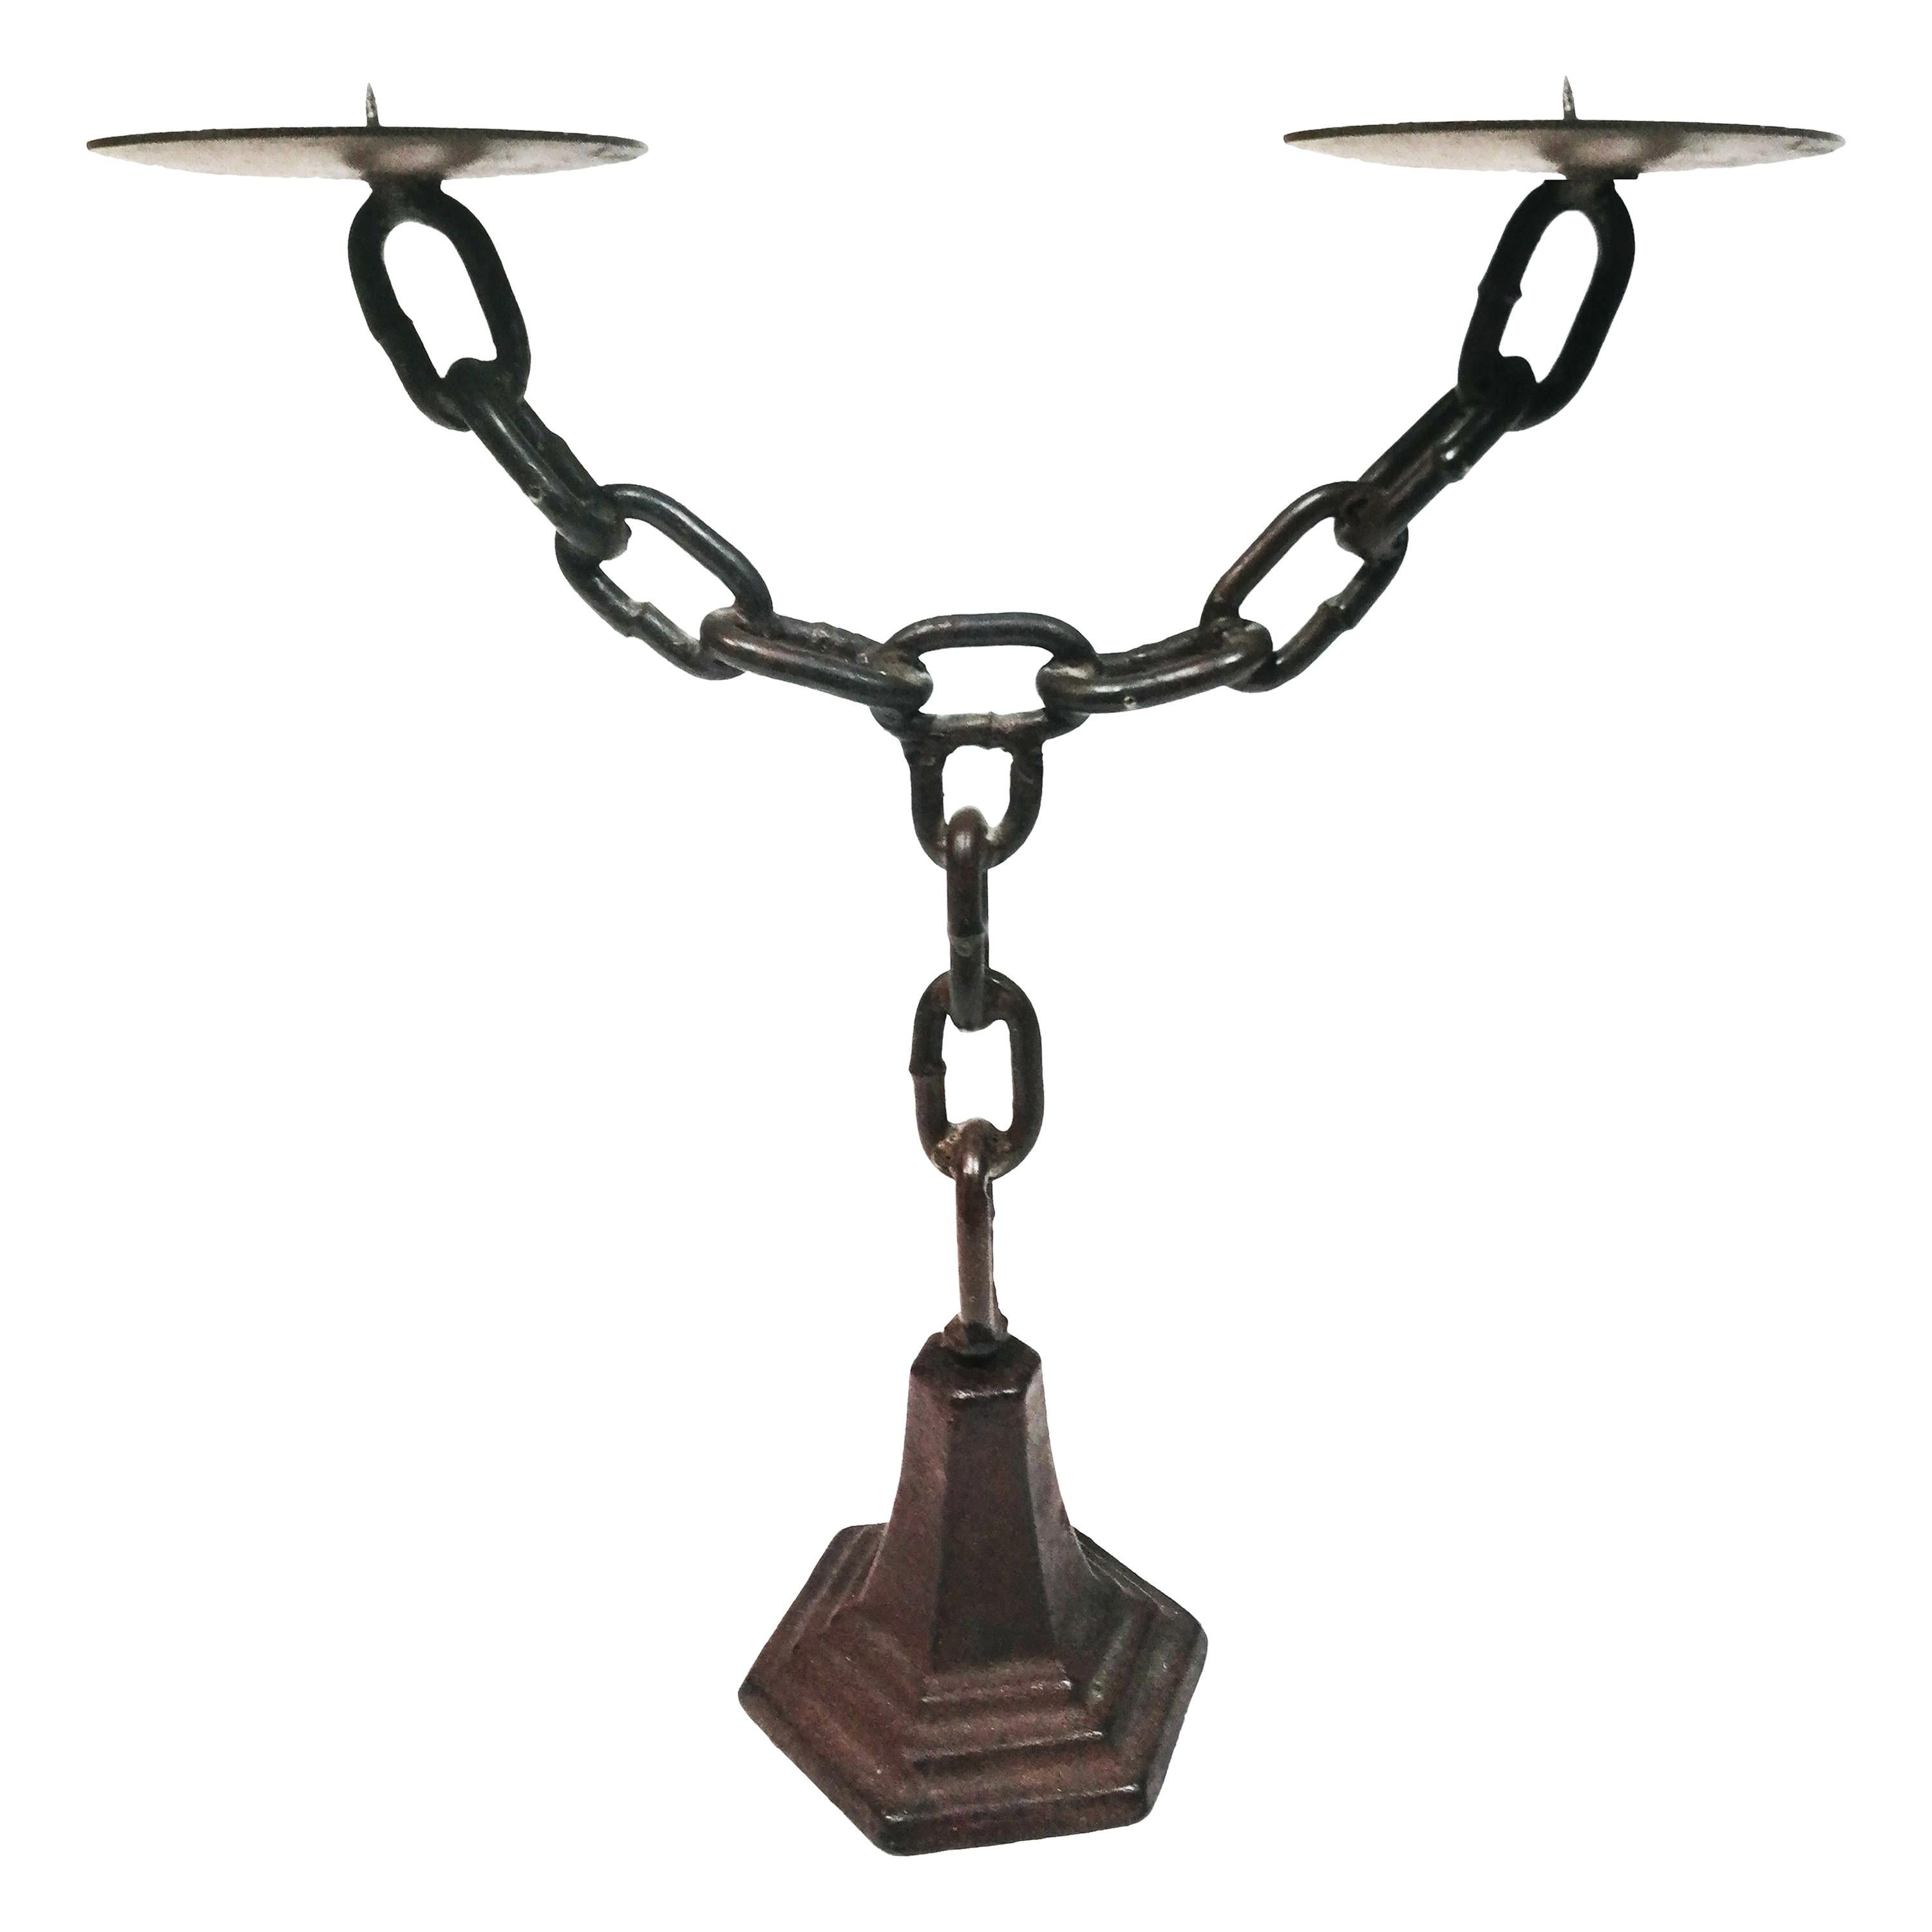 Art Deco , Chain Shaped Iron Candlestick, Spain, Early 20th